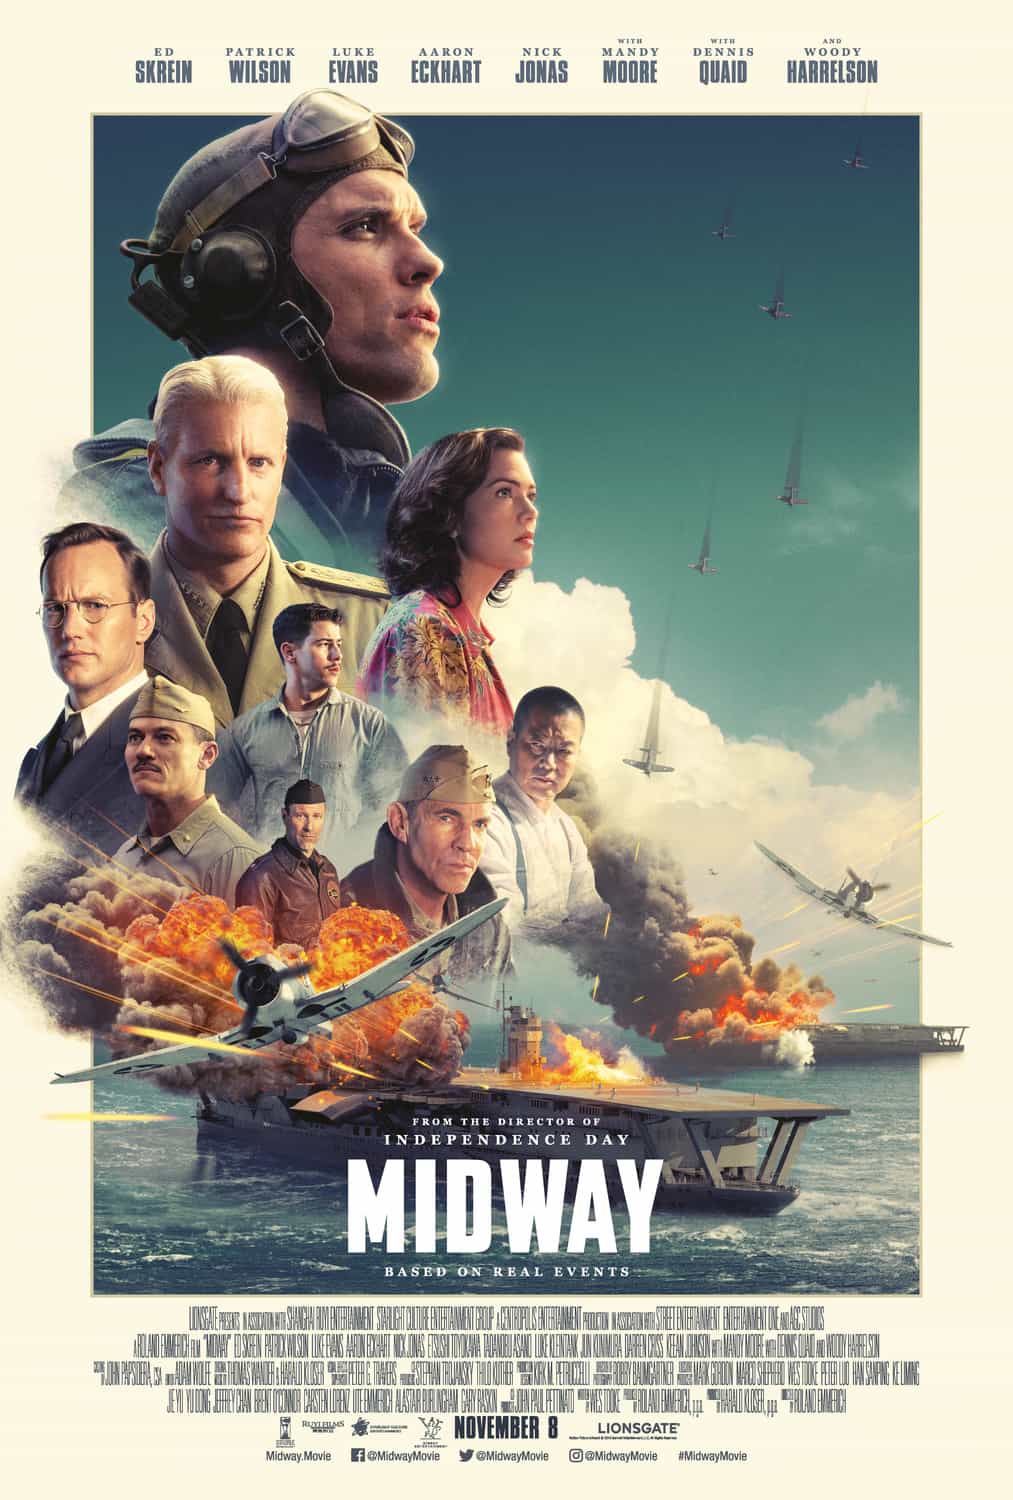 UK box office preview for weekend Friday, 8th November 2019 -  Midway, The Irishman, Better Days, The Good Liar, Luce, Arctic Dogs, Driven and The Aeronauts